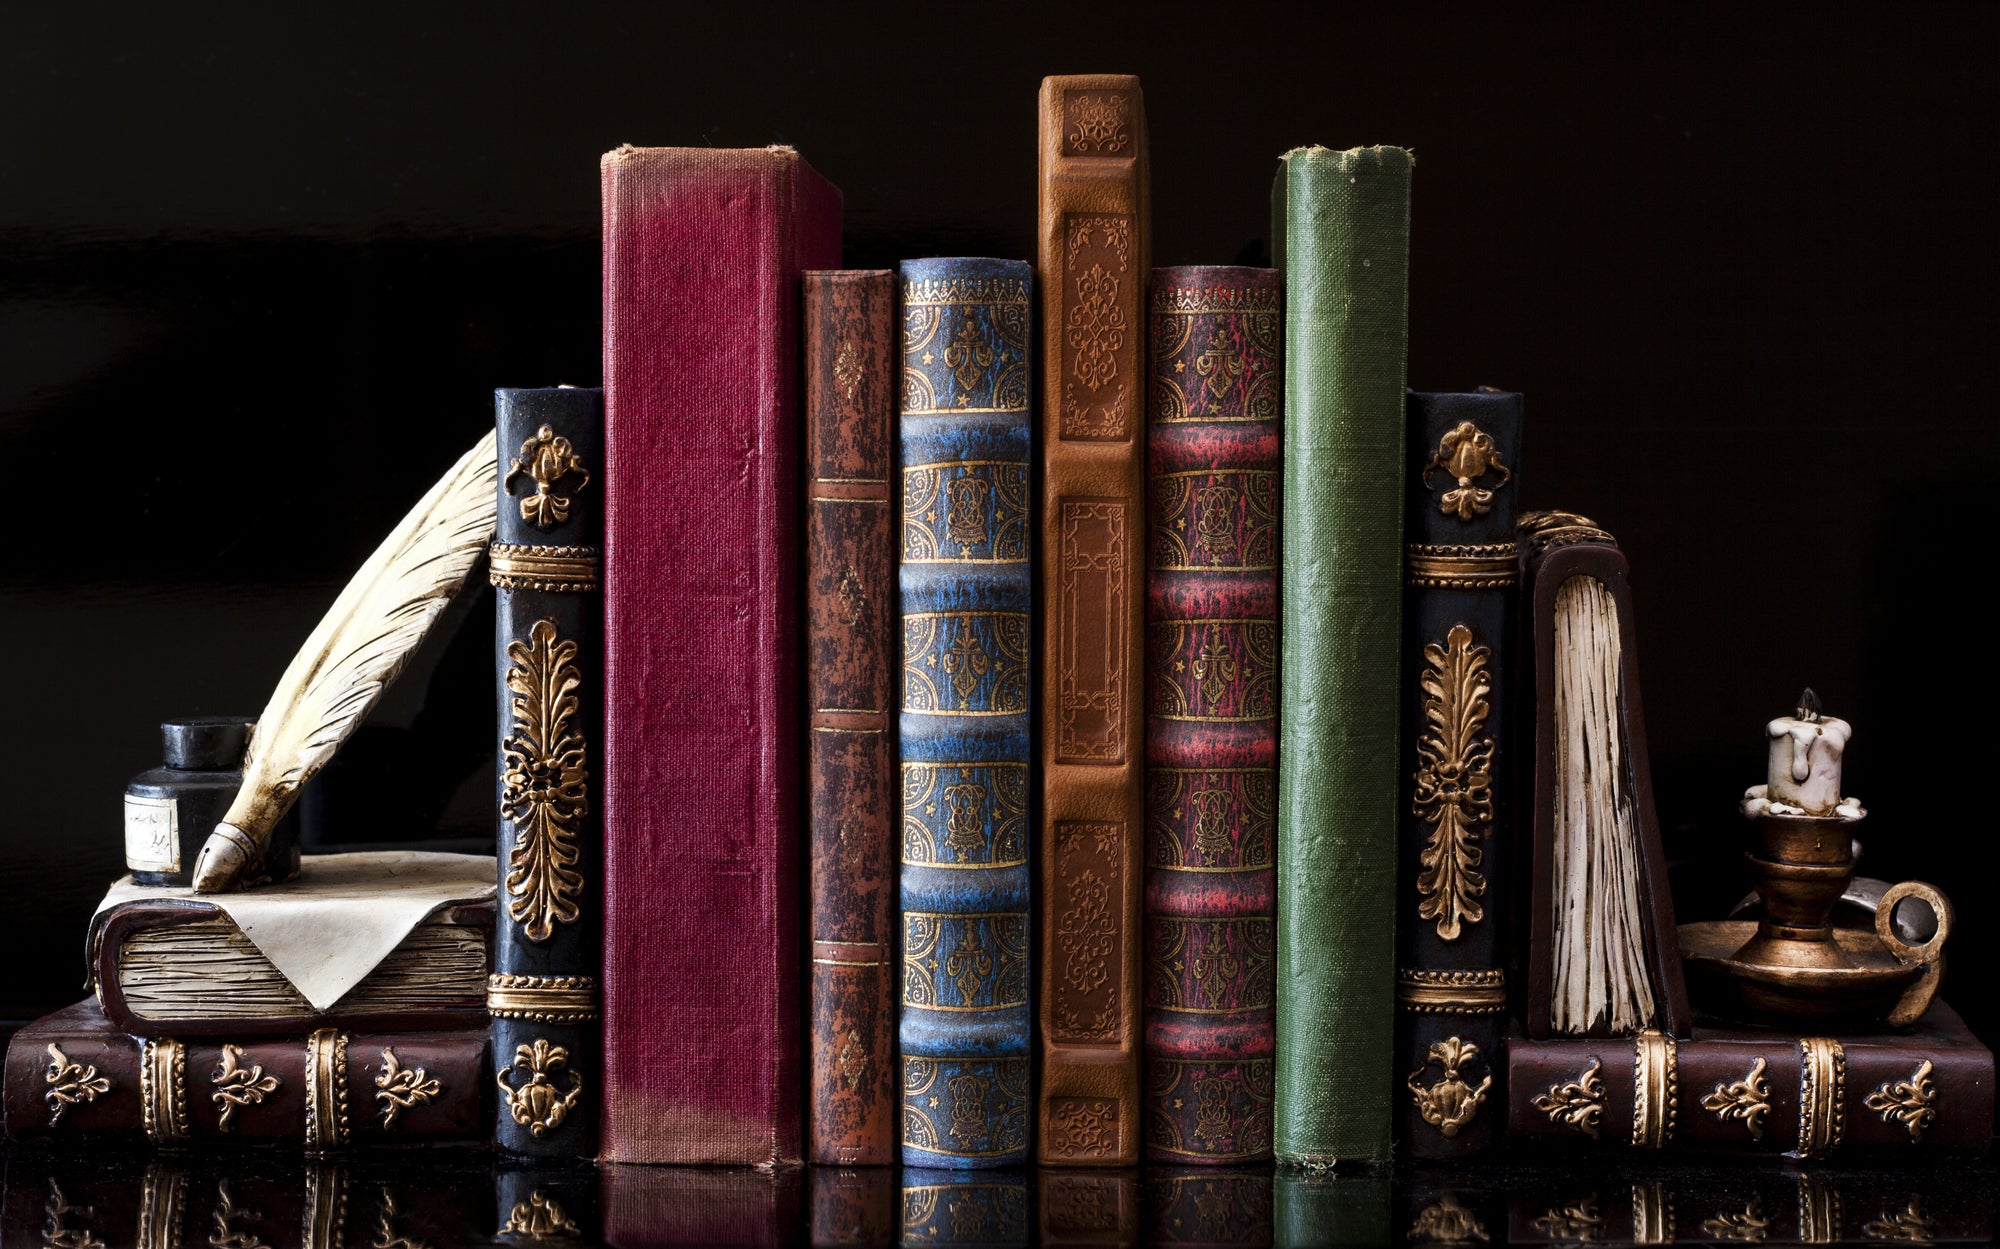 Top 10 Classic Books Every Gentleman Should Read